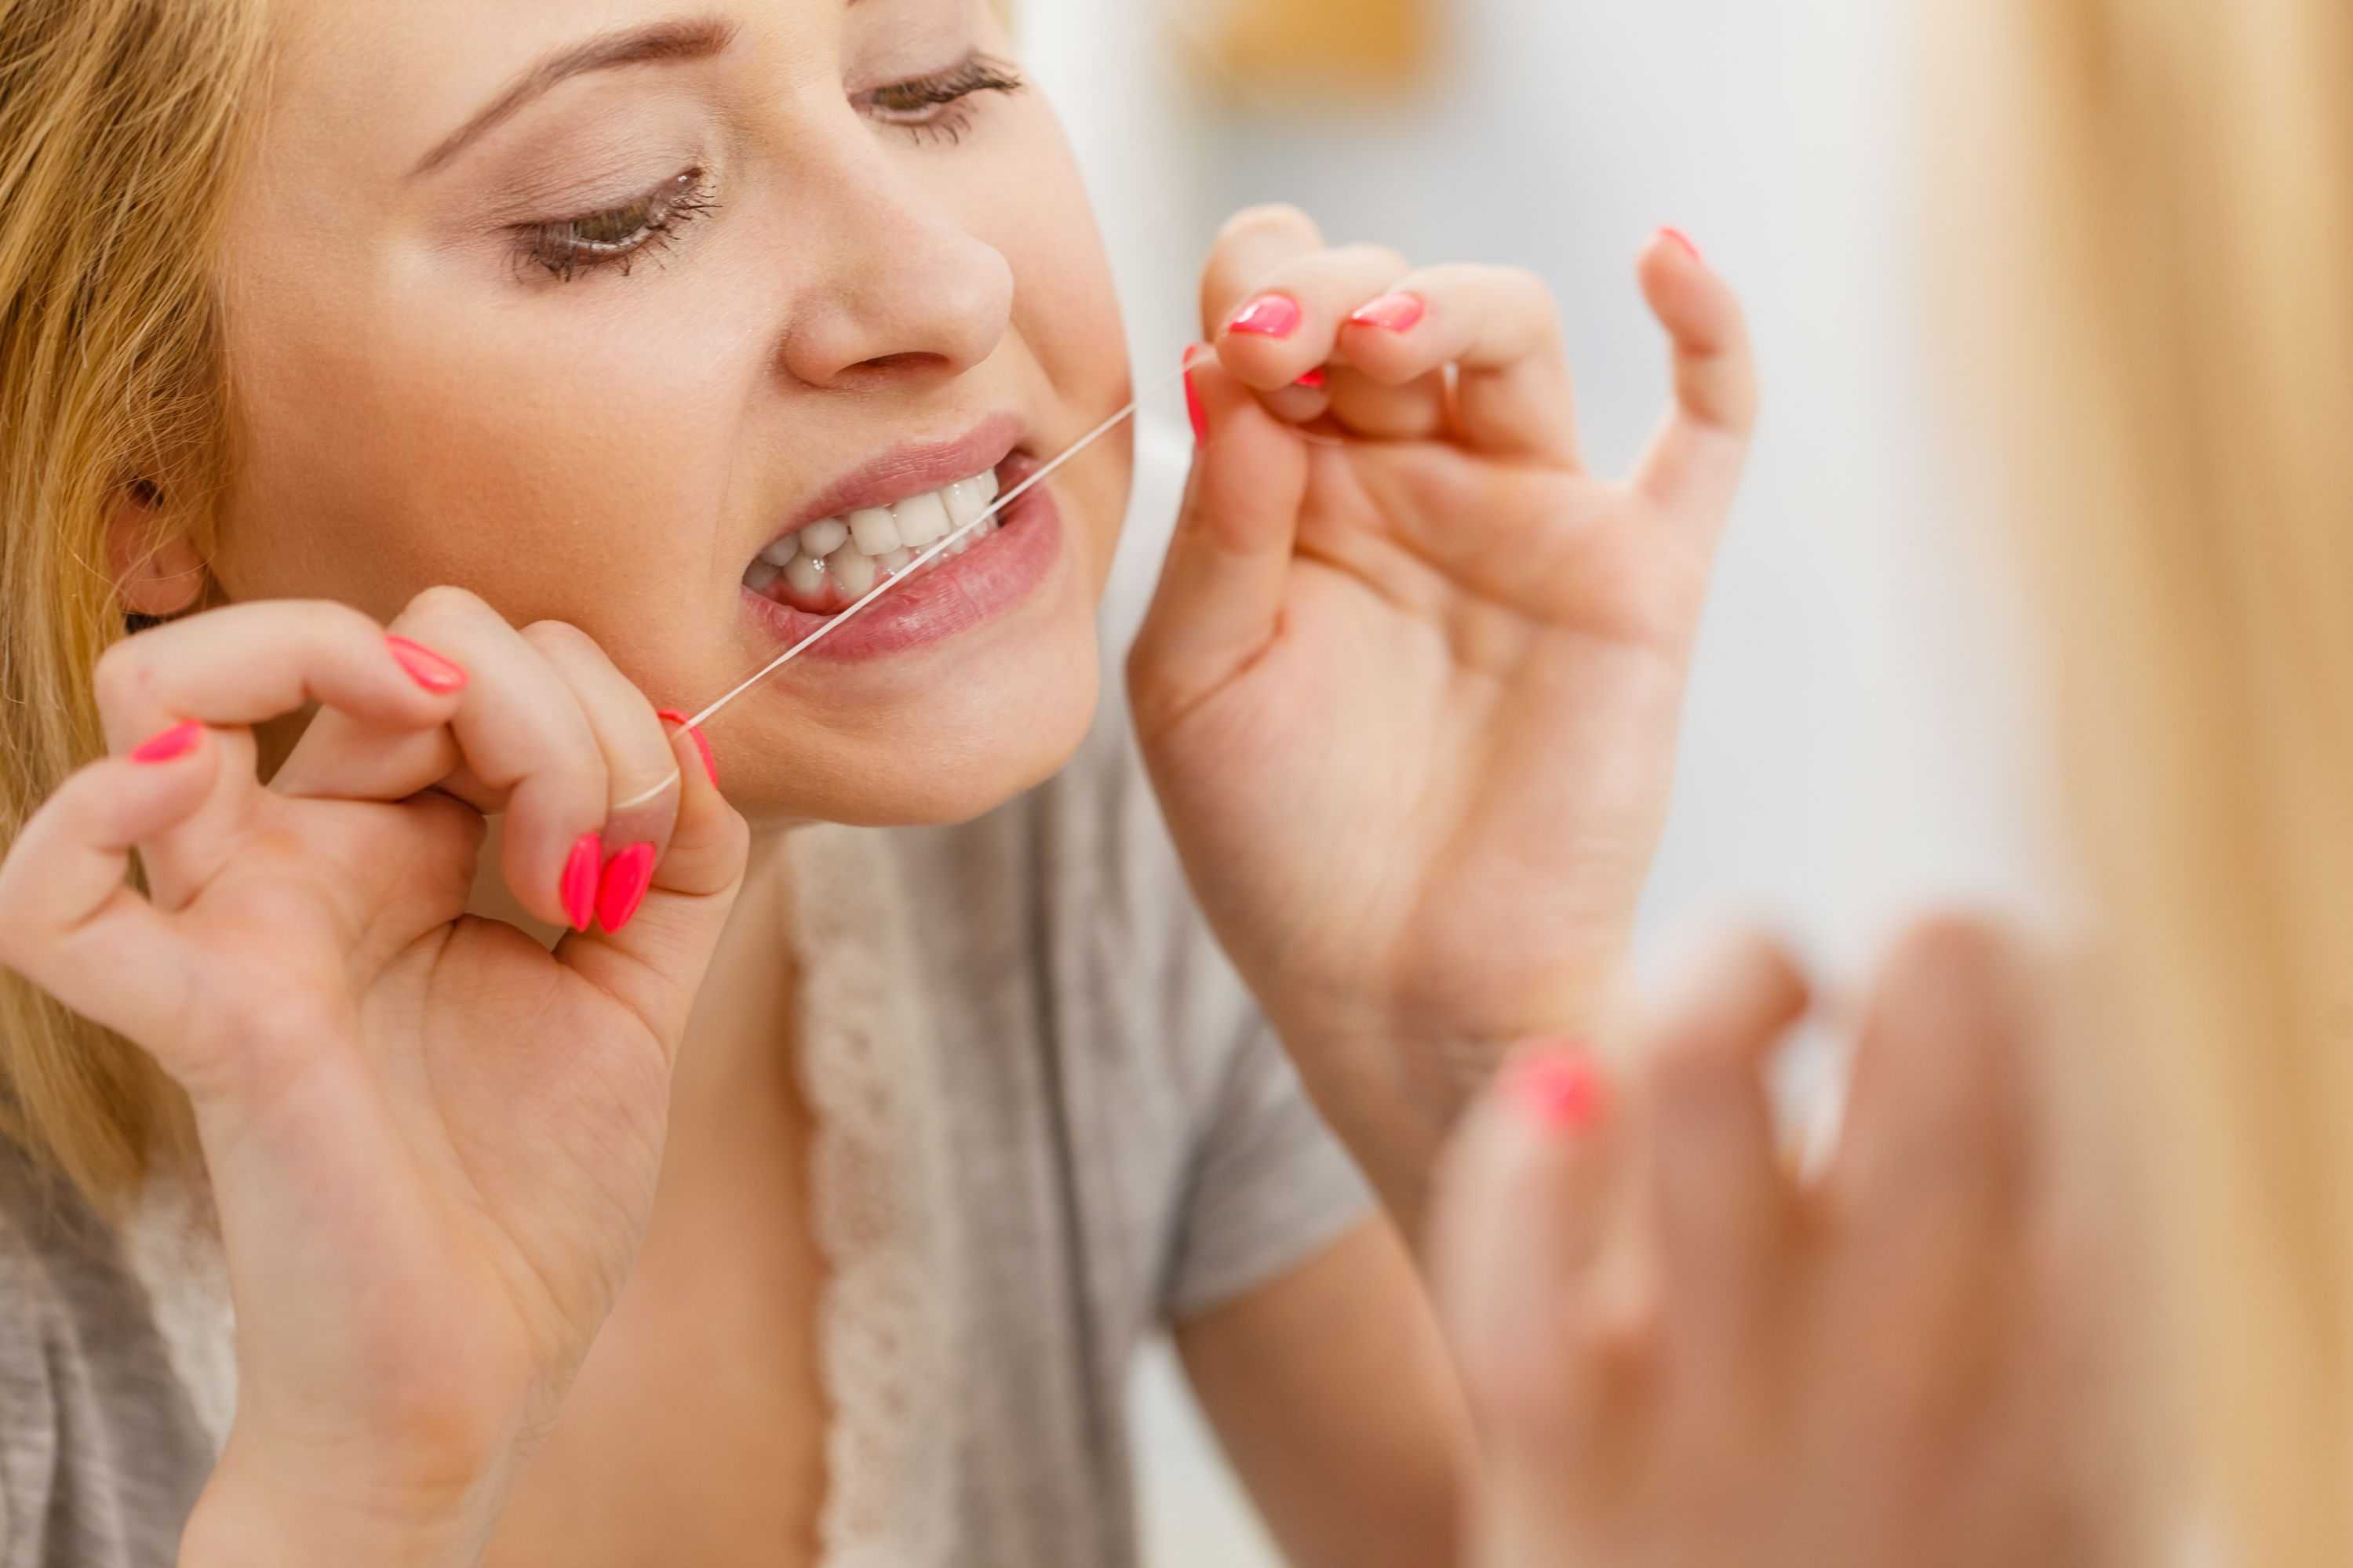 Can You Floss Too Much & How Often Should You Floss? 